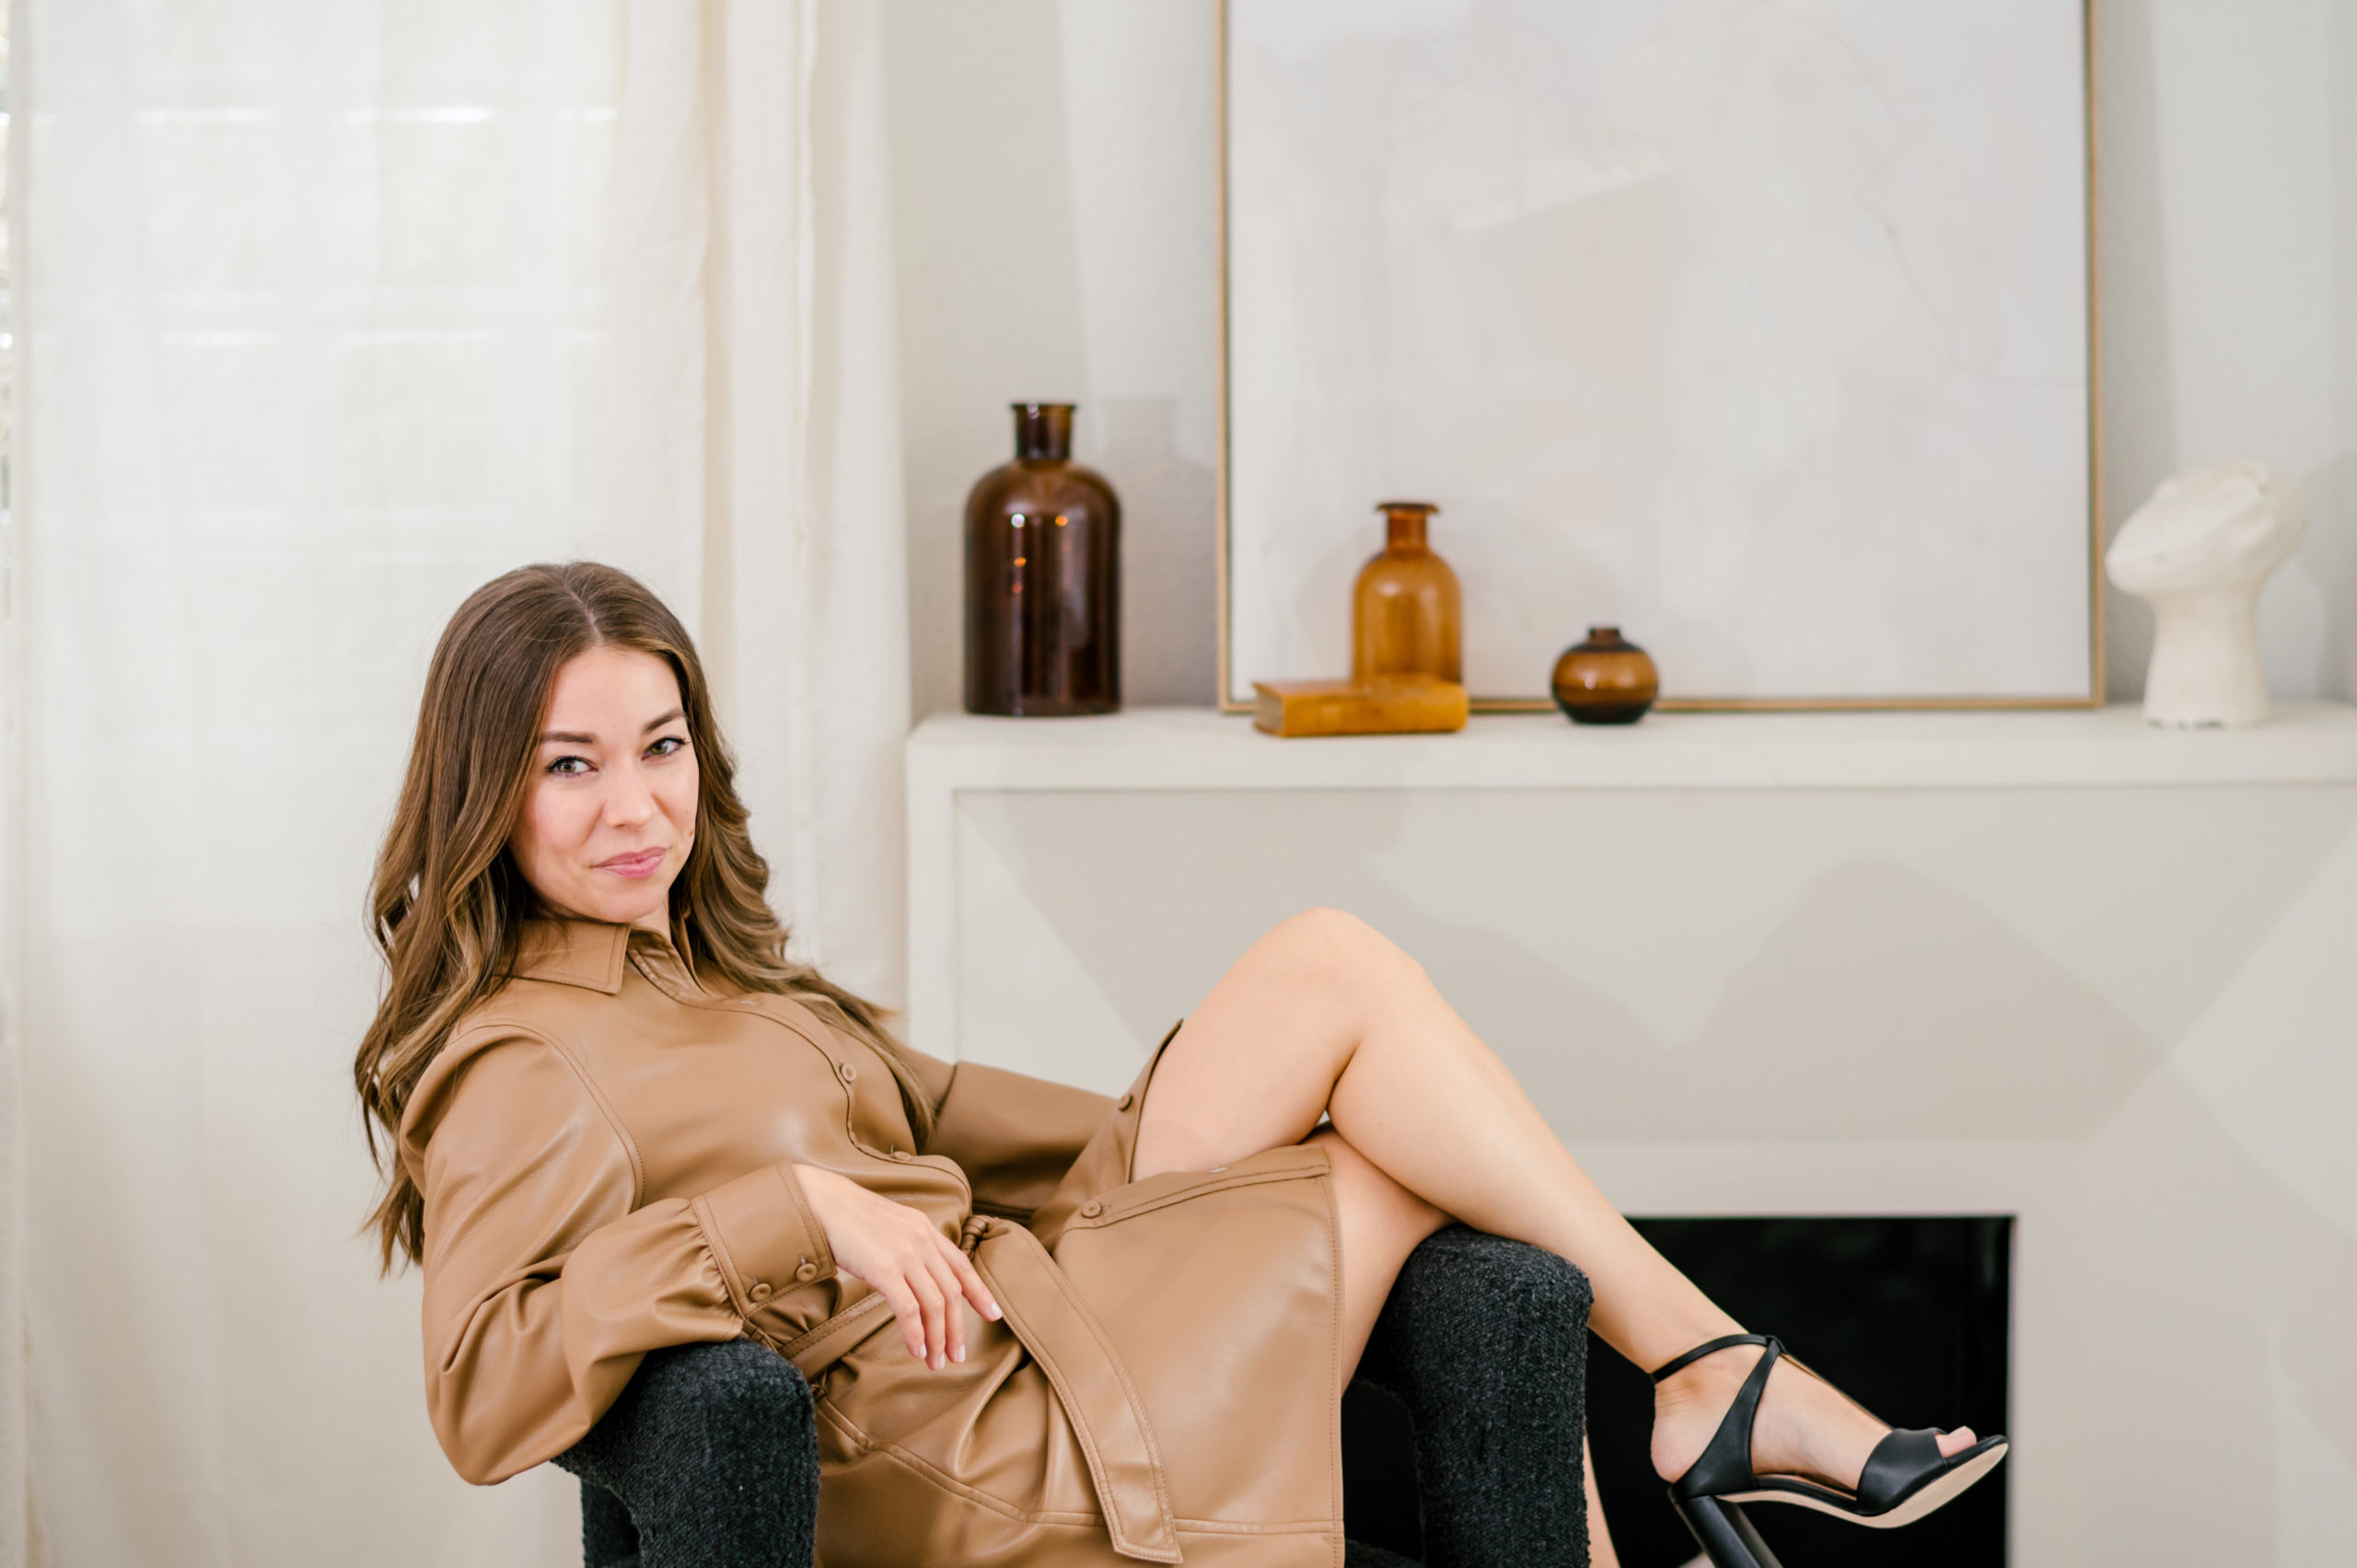 Woman sitting on black love seat in a brown leather dress posing